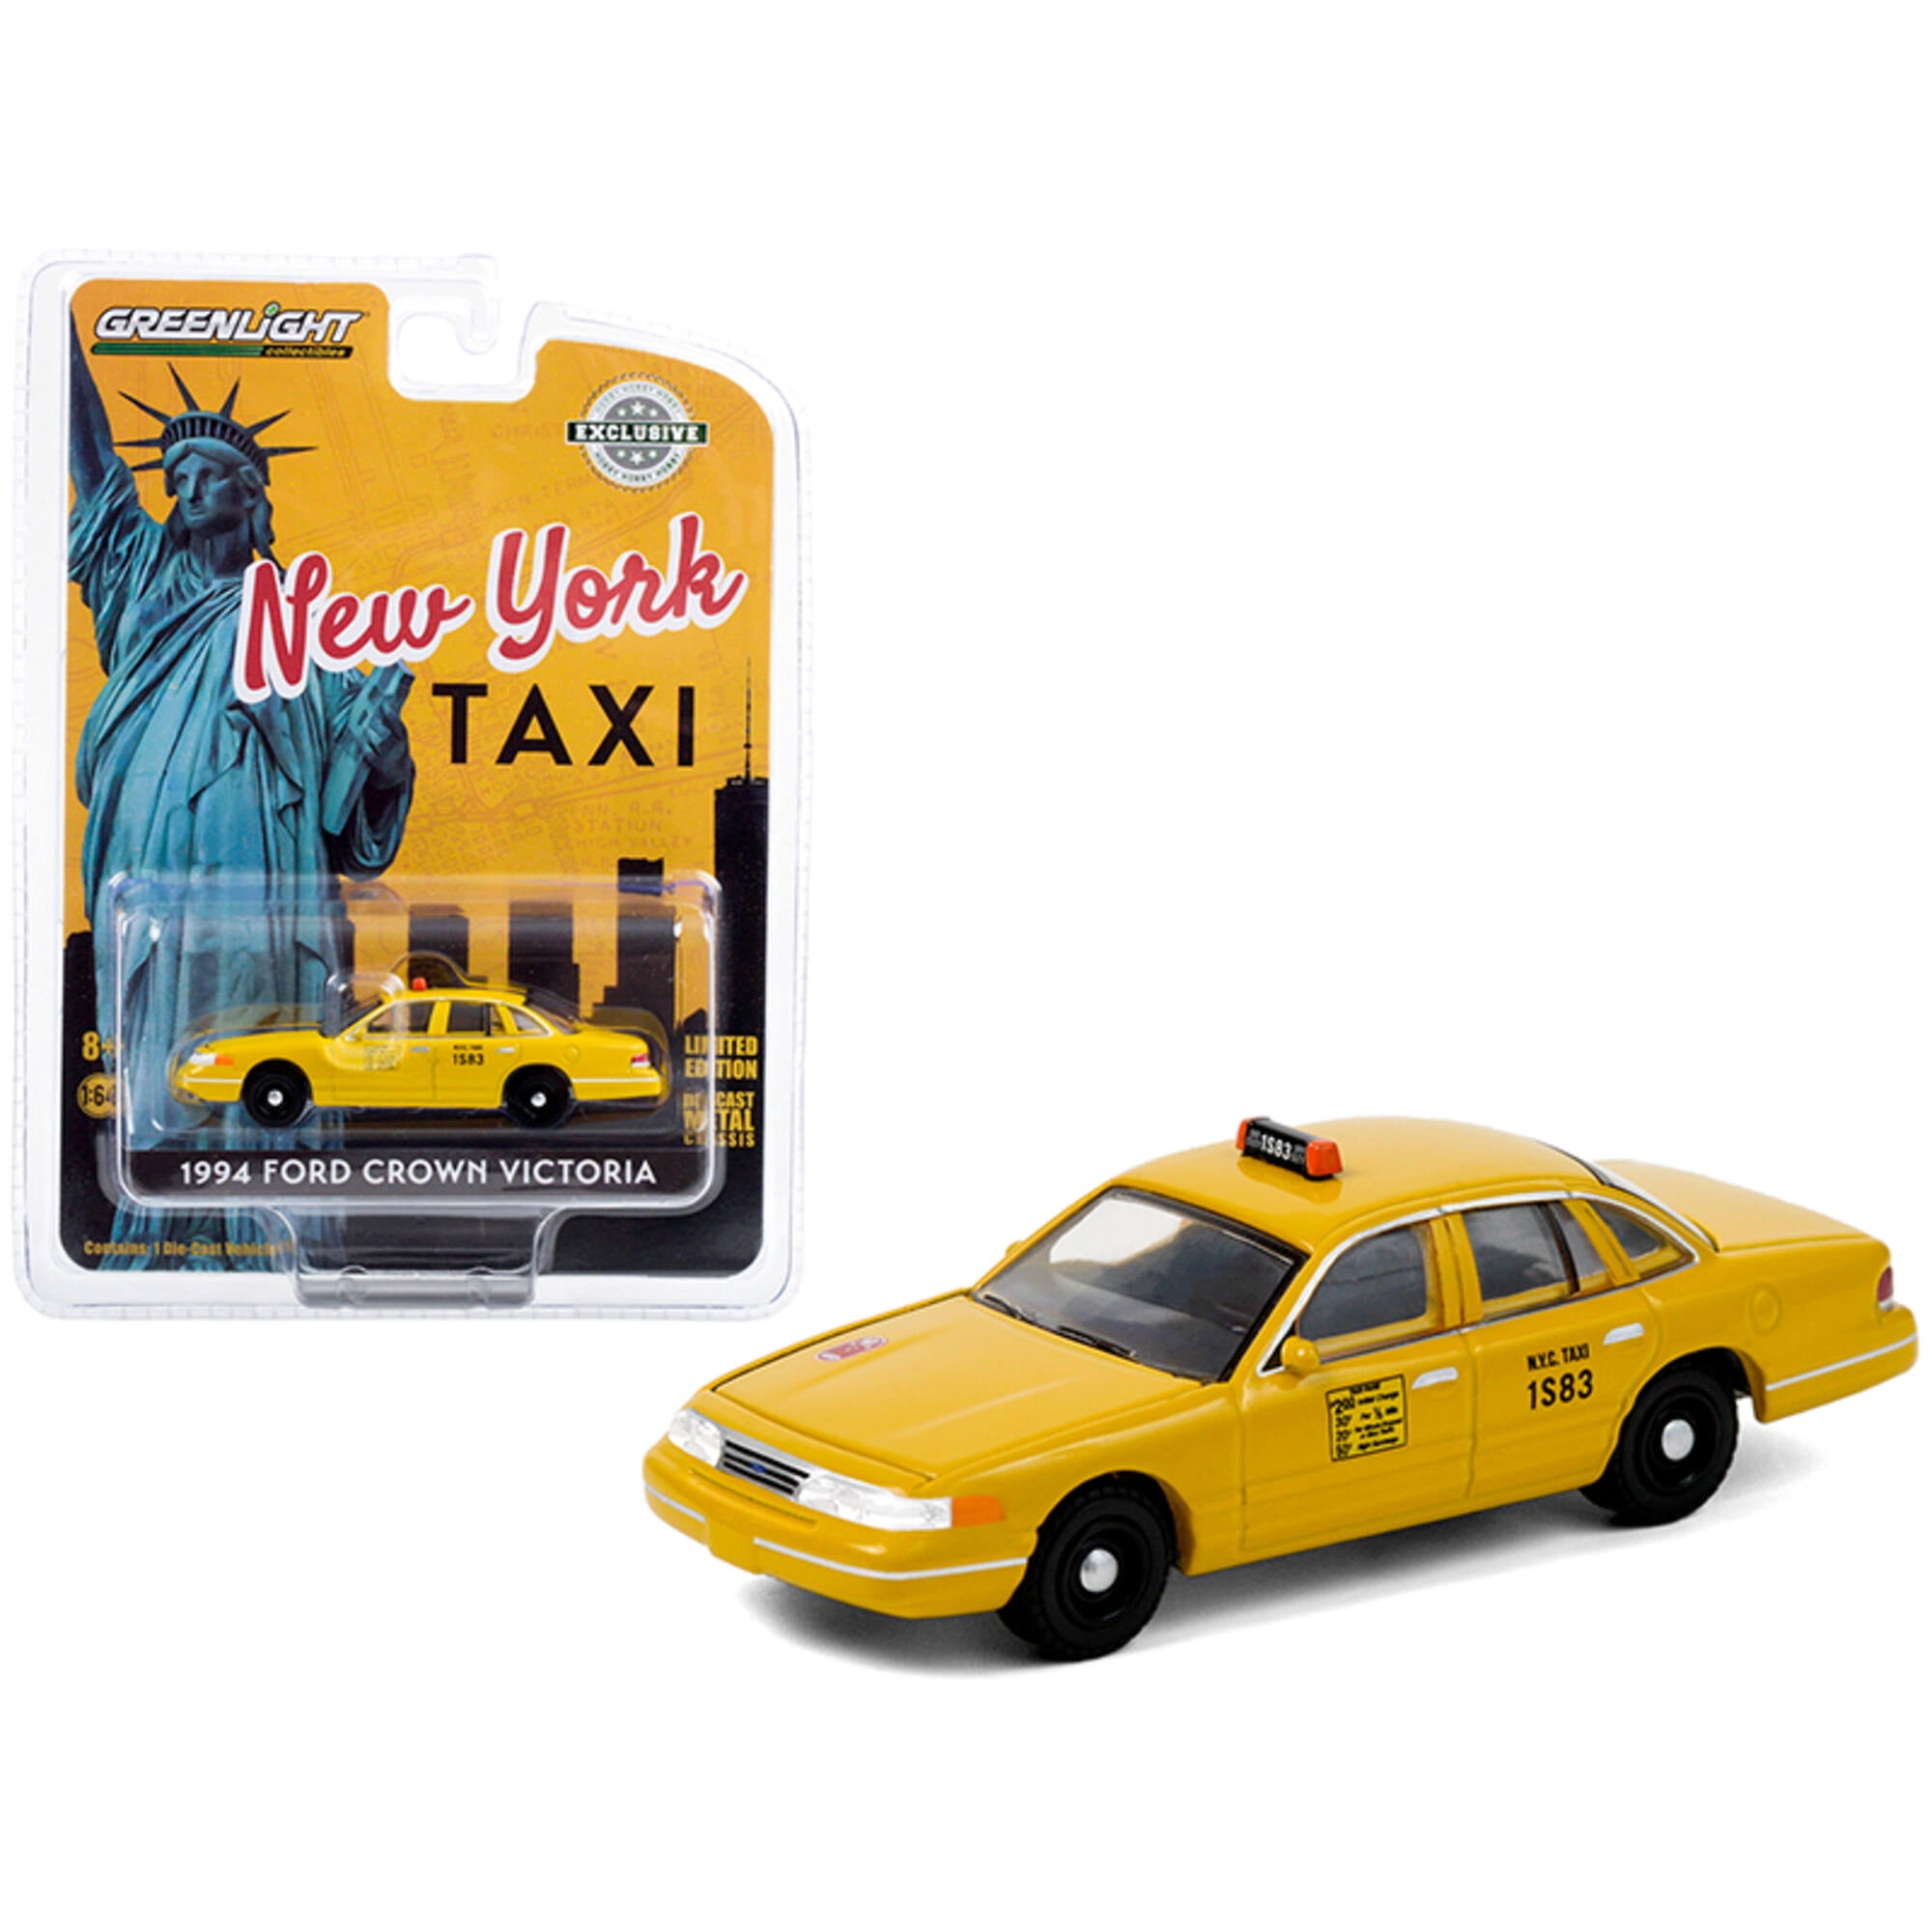 30206 1994 Ford Crown Victoria Yellow NYC Taxi New York City Hobby Exclusive .16 4 Diecast Model Car -  GreenLight